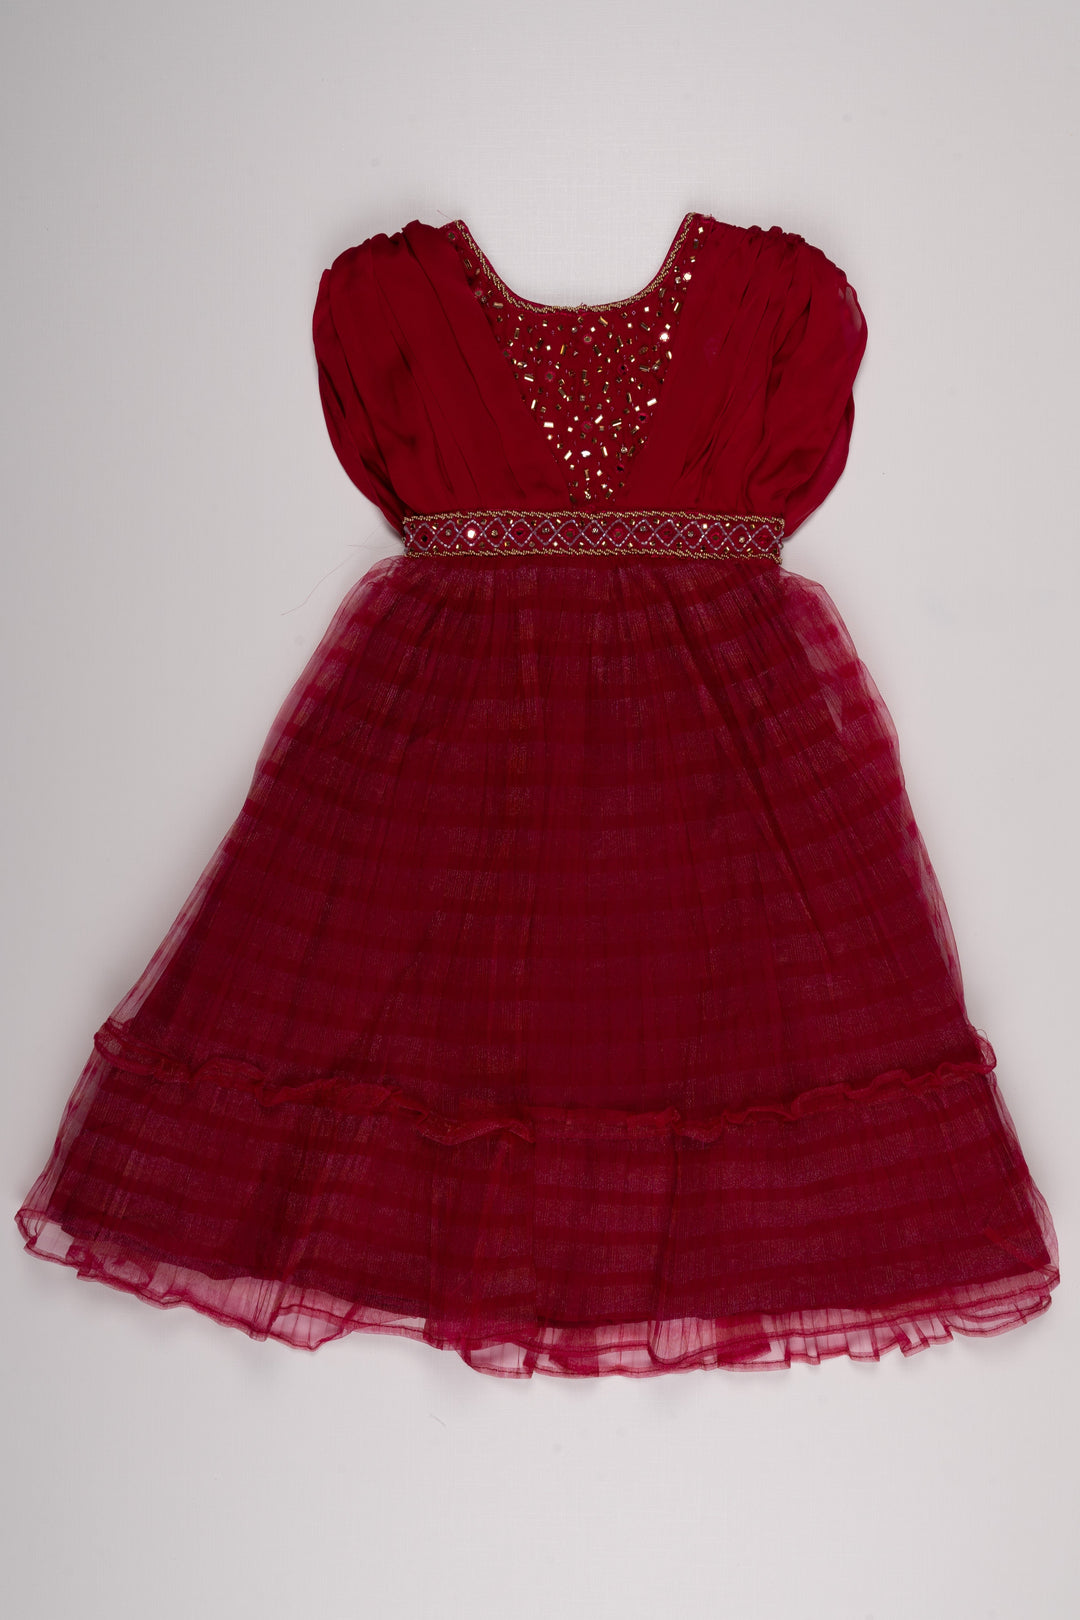 The Nesavu Girls Party Gown Dazzling Mirror Stone Embroidered Pleated & Striped Pattern Red Anarkali Gown for Girls- Elegant Diwali Anarkali Dresses Nesavu 20 (3Y) / Red / Plain Net GA142B-20 Anarkali Embroidery Dress Designs | Festive Diwali Anarkali Outfits | The Nesavu